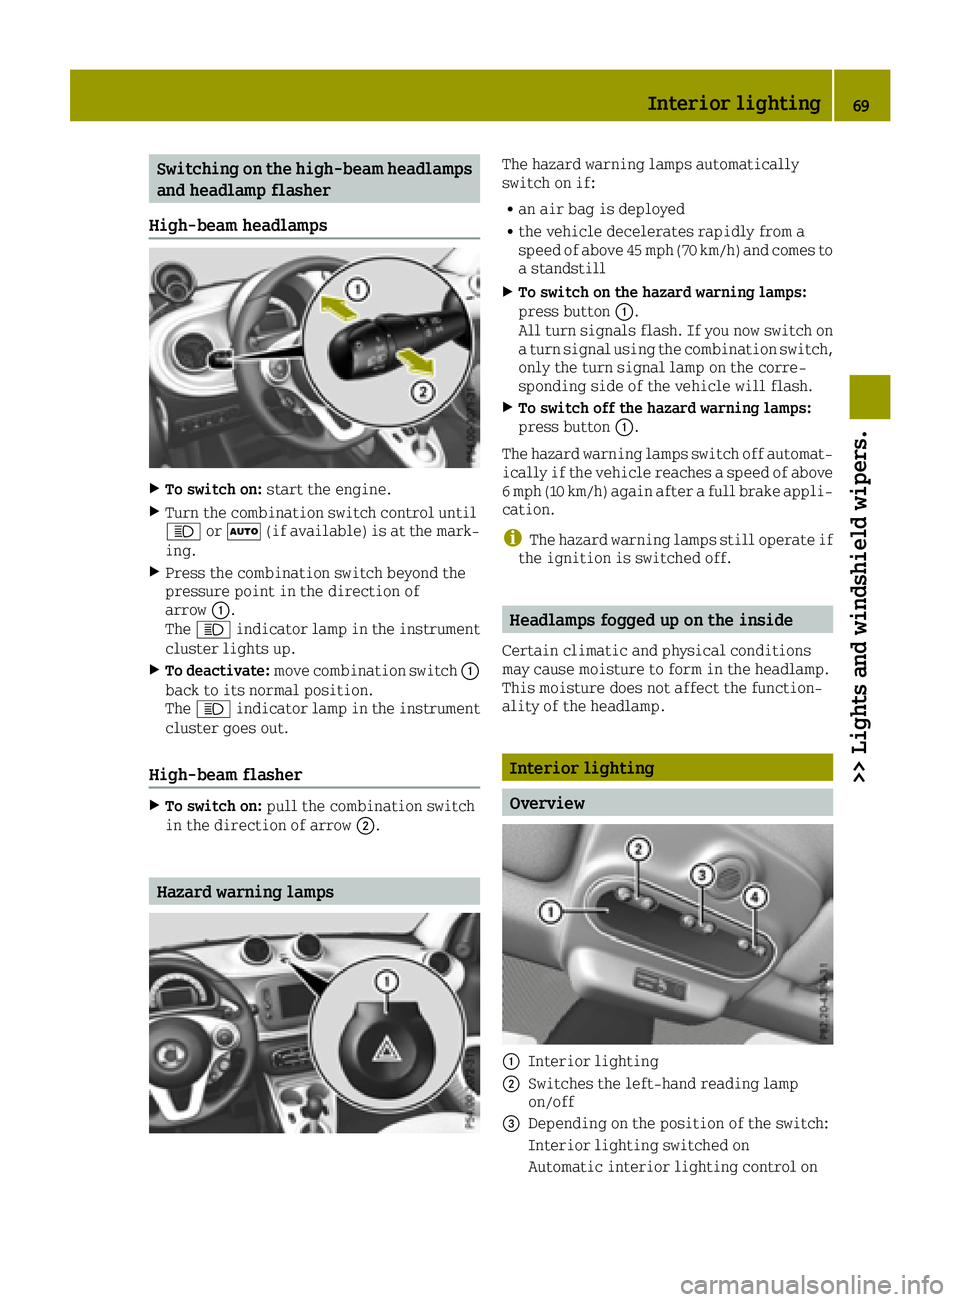 SMART FORTWO 2016  Owners Manual Switching on the high-beam headlamps
and headlamp flasher
High-beam headlamps
XTo switch on: start the engine.
XTurn the combination switch control until
0057or0058 (if available) is at the mark-
ing.